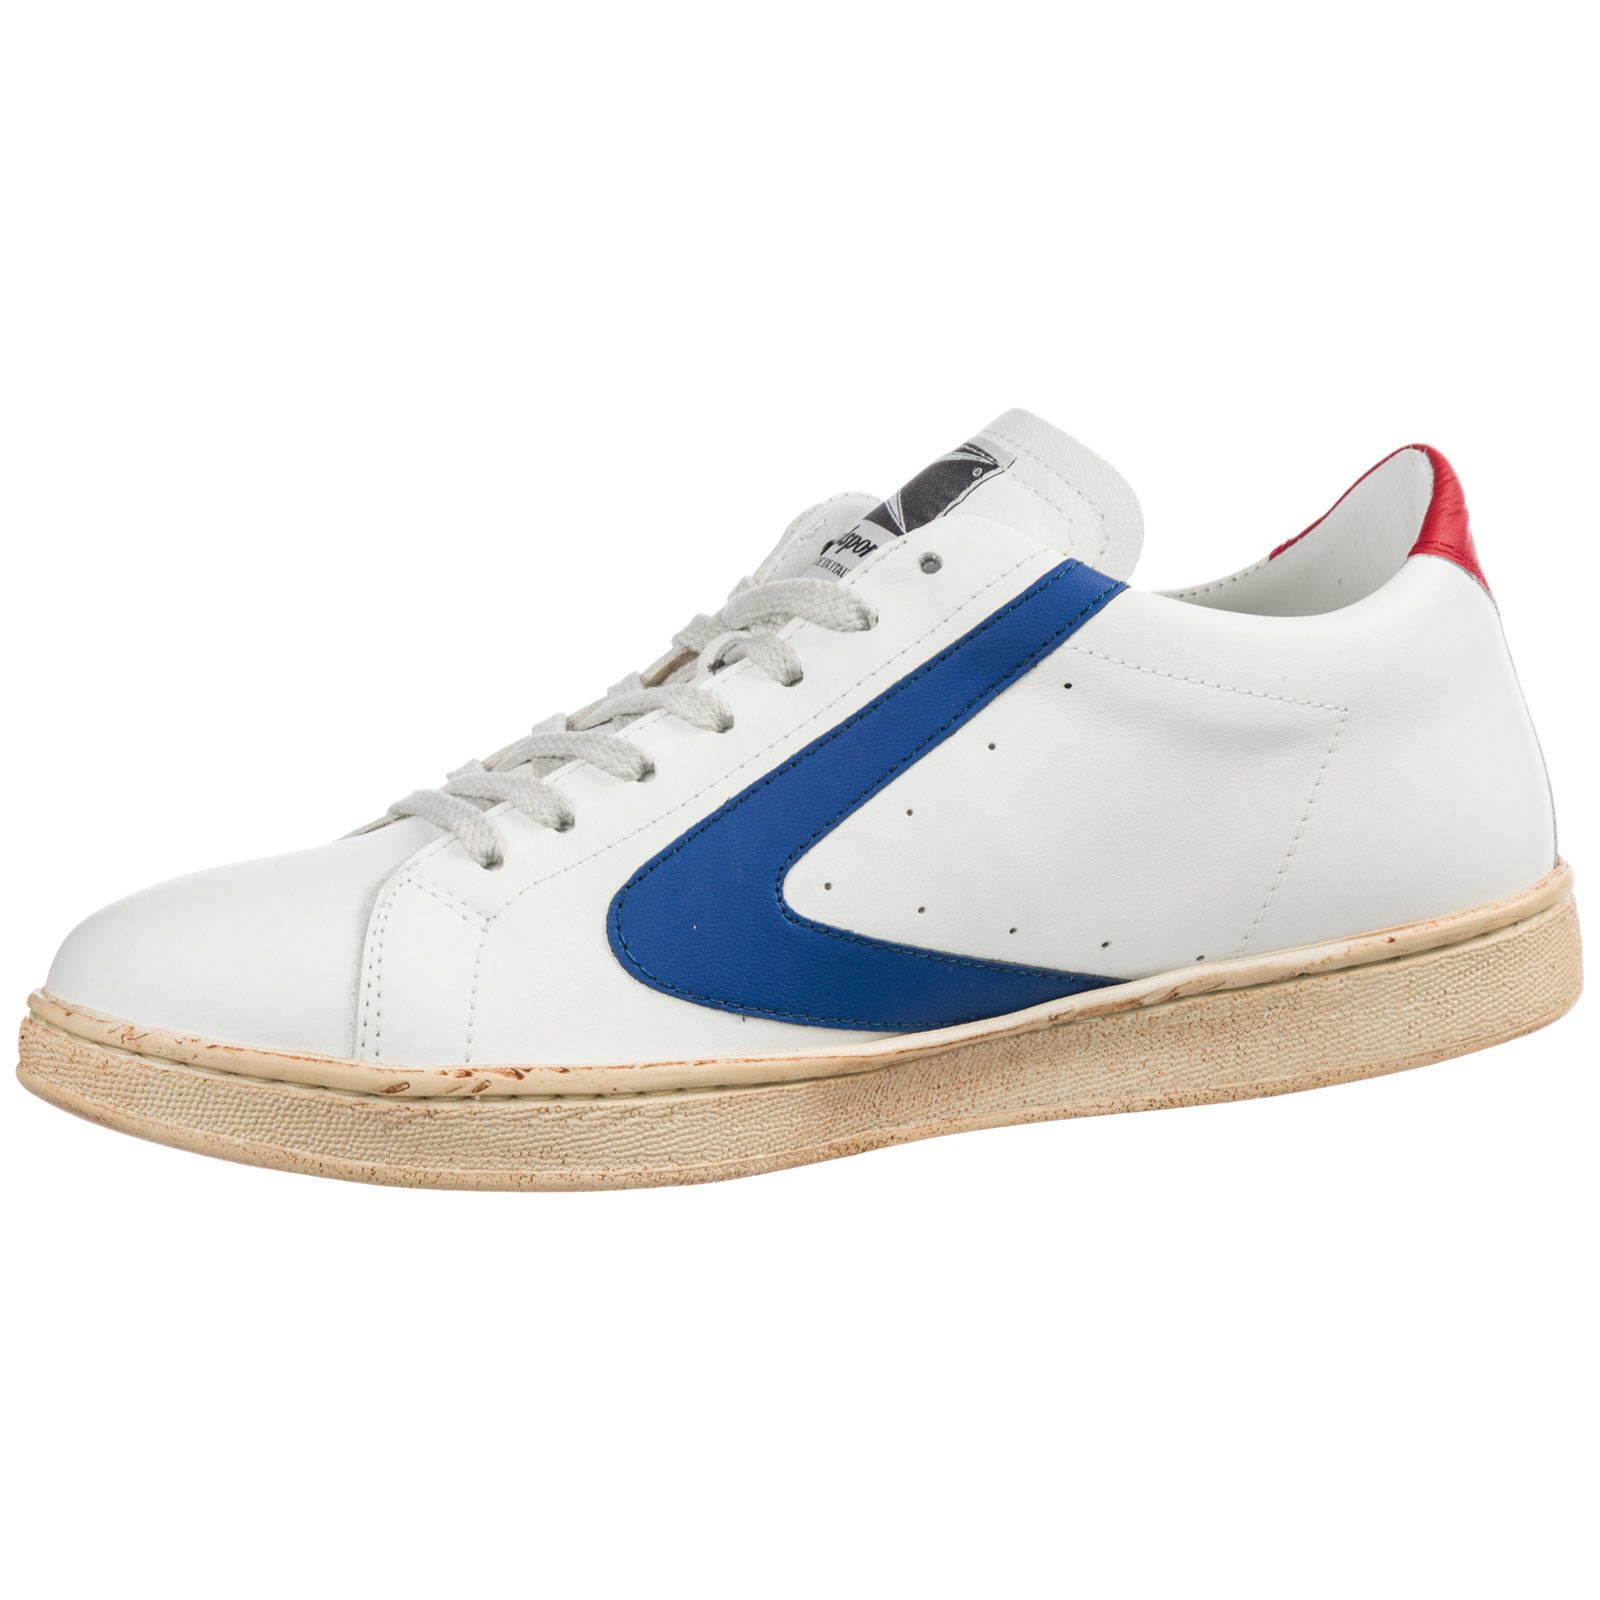 Valsport Valsport Shoes Leather Trainers Sneakers Tournament - Basic ...